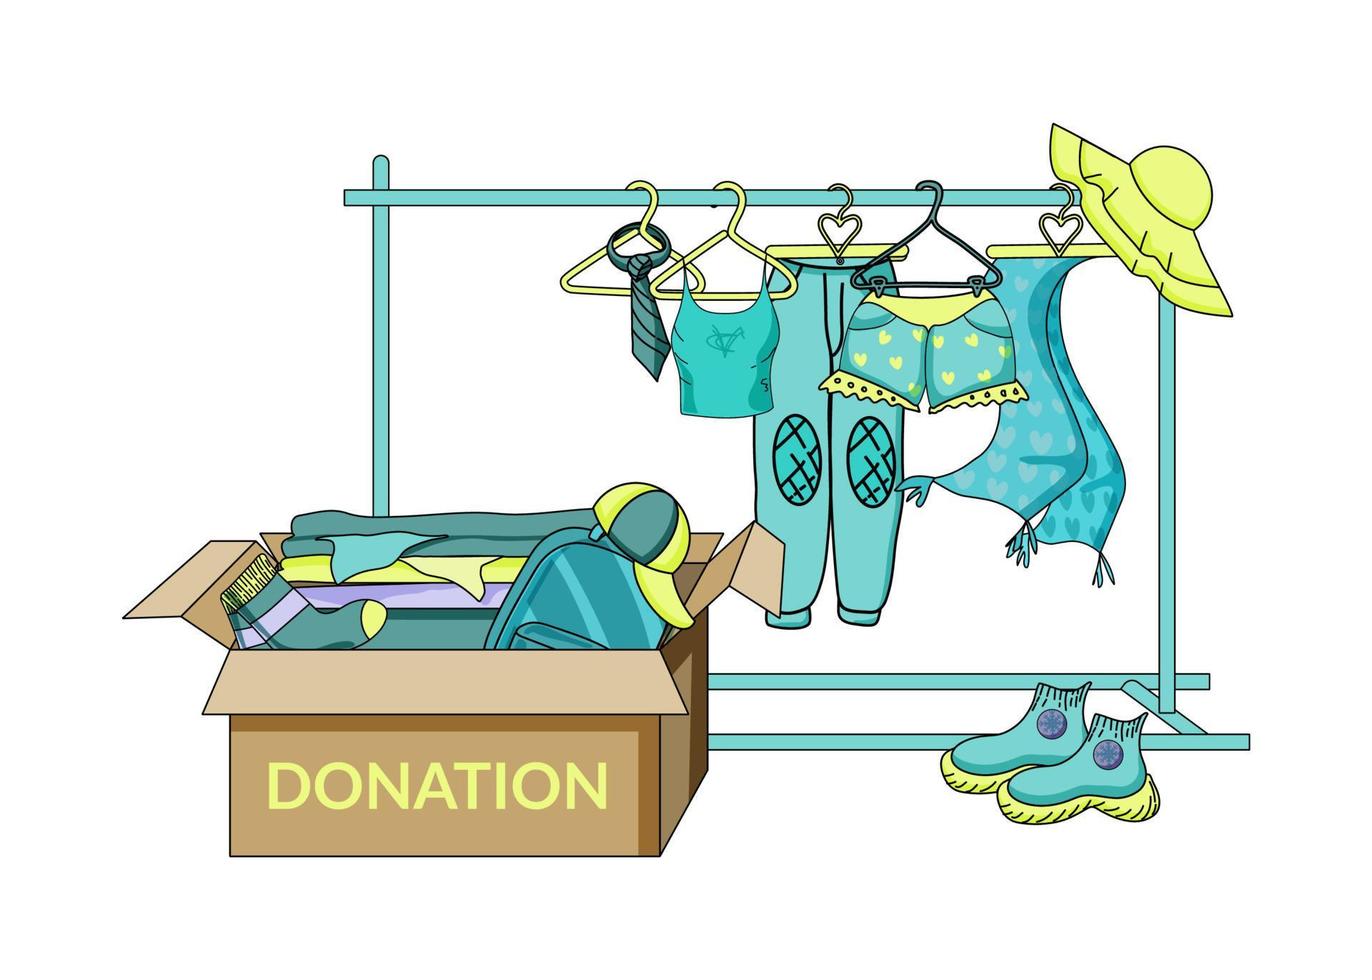 Used clothing donation flat vector illustration. Cheap and free clothing. Box of clothes. Second hand, goods from flea market. Pants, shorts, tie, scarf hanging on a rack. Women's and men's clothing.